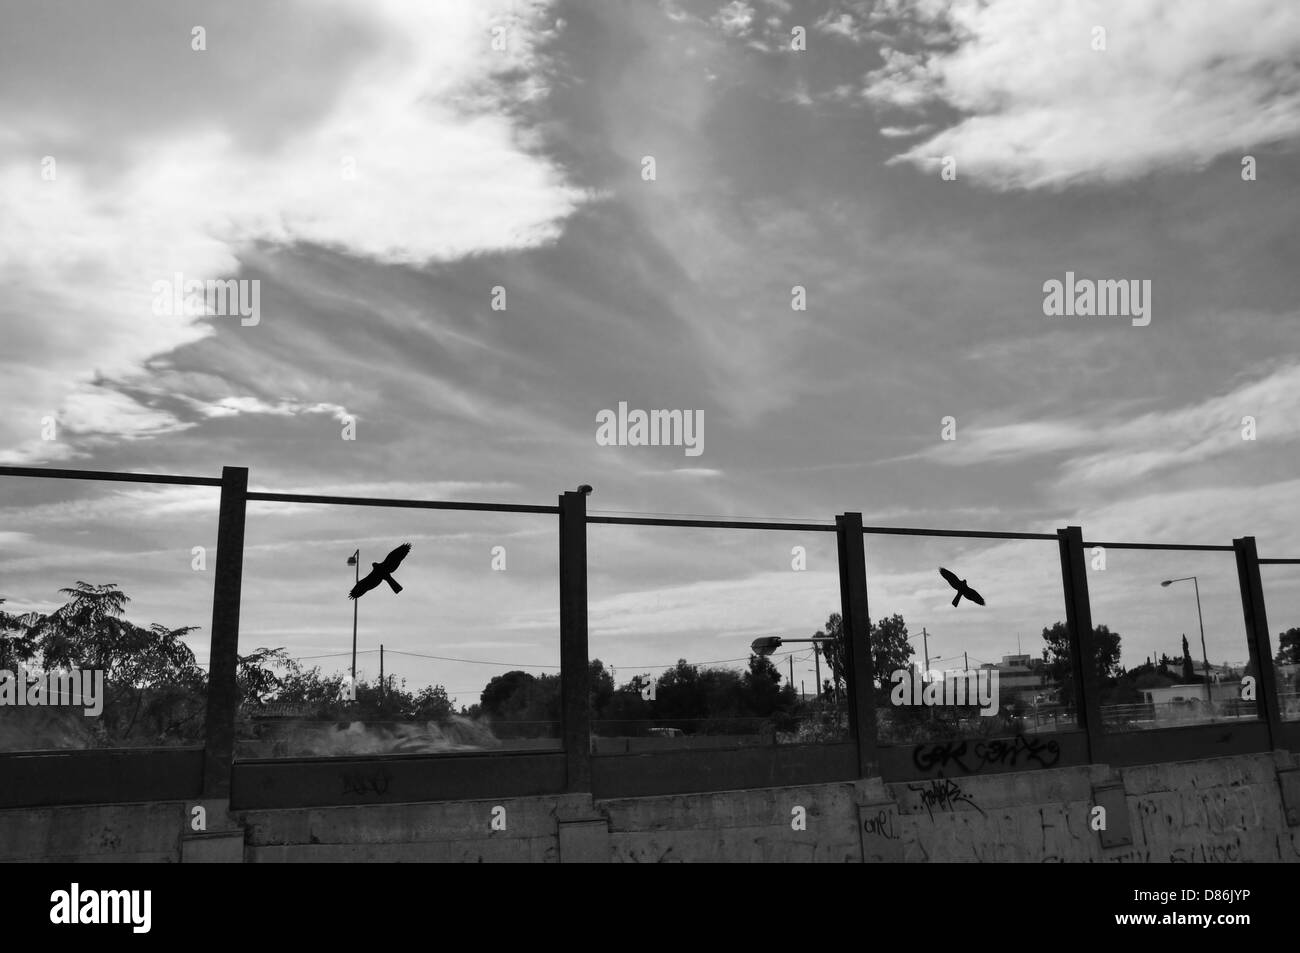 Flying bird silhouette on highway glass barrier, autumn city sky. Black and white. Stock Photo